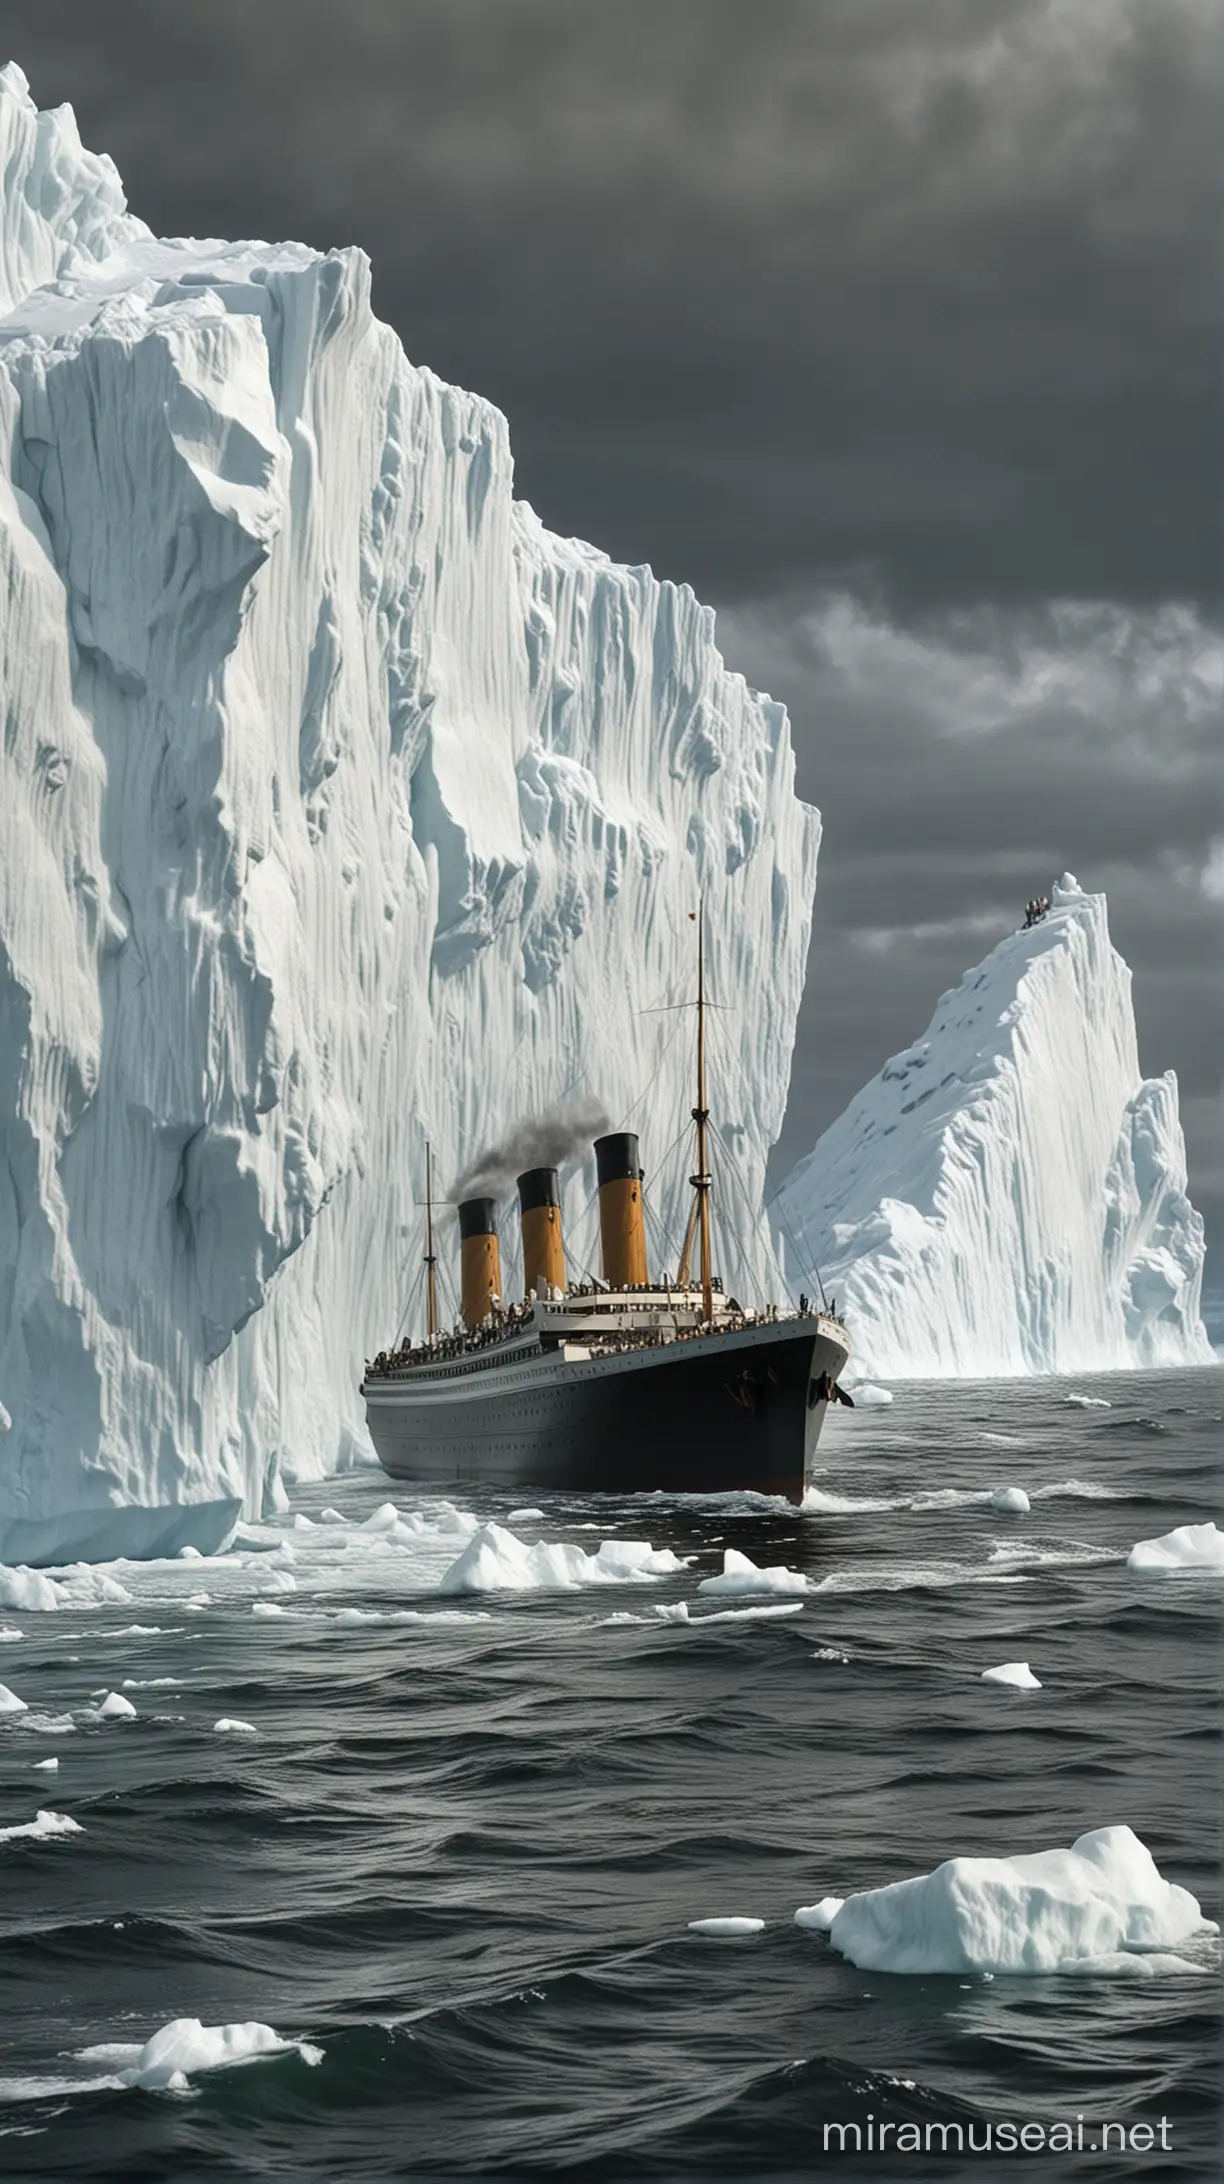 Historic Disaster Titanic Collides with Iceberg near SS Californian